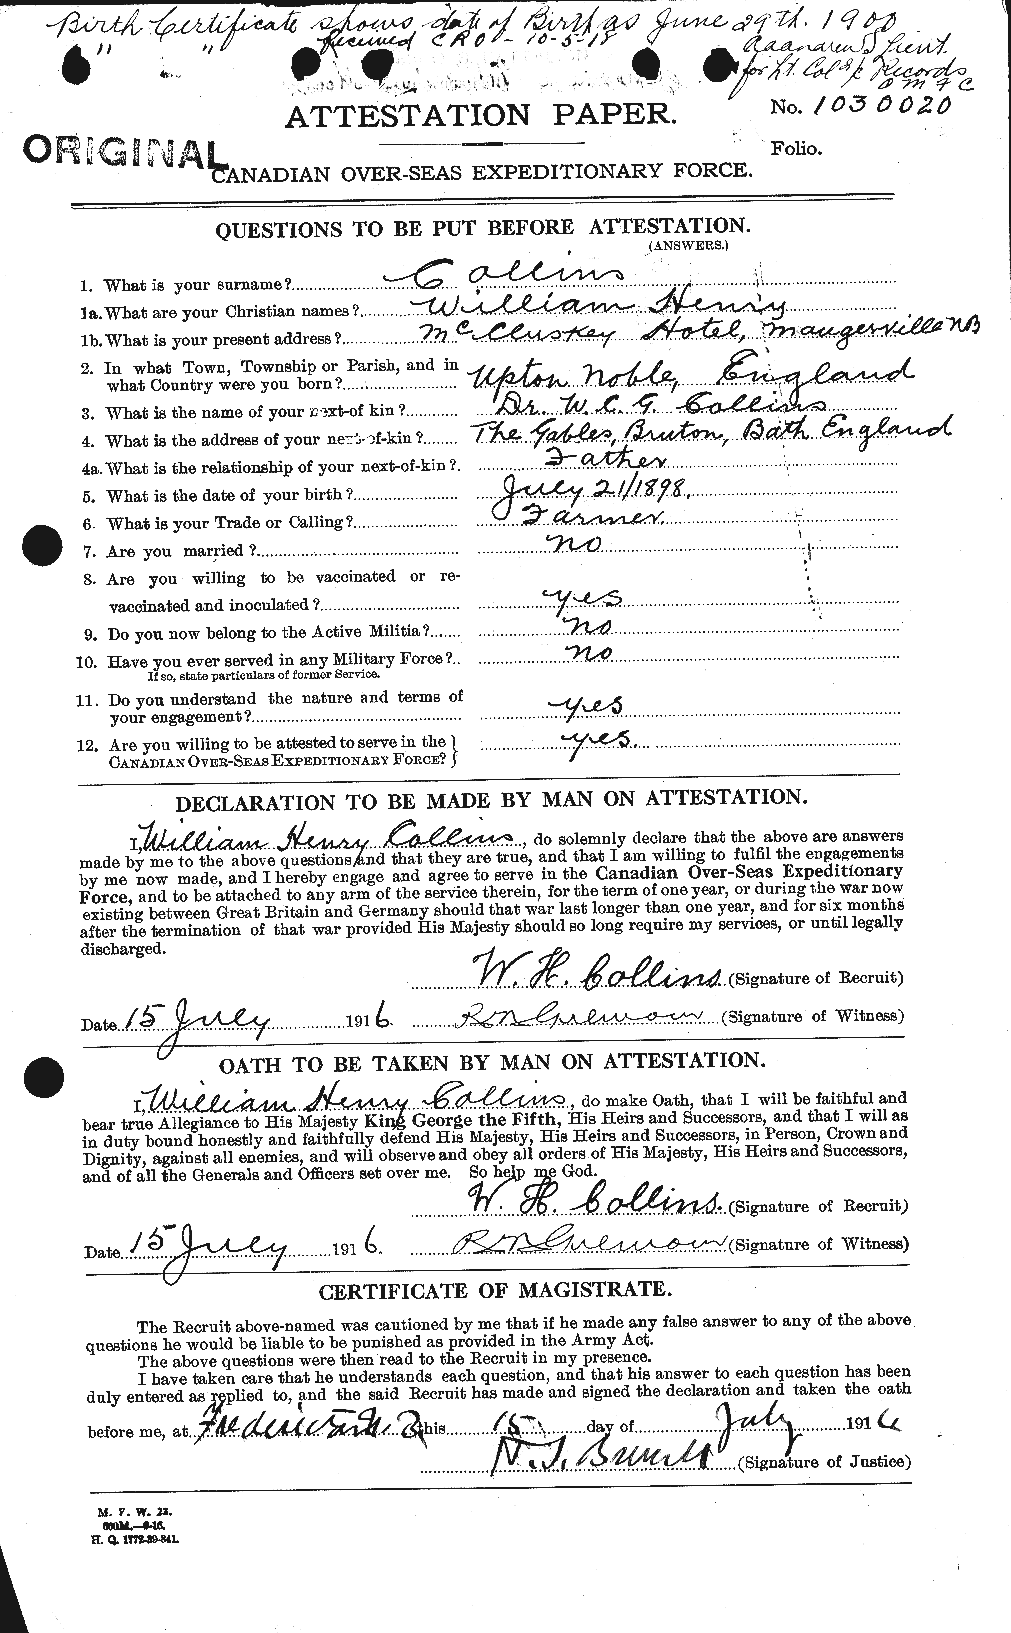 Personnel Records of the First World War - CEF 068520a